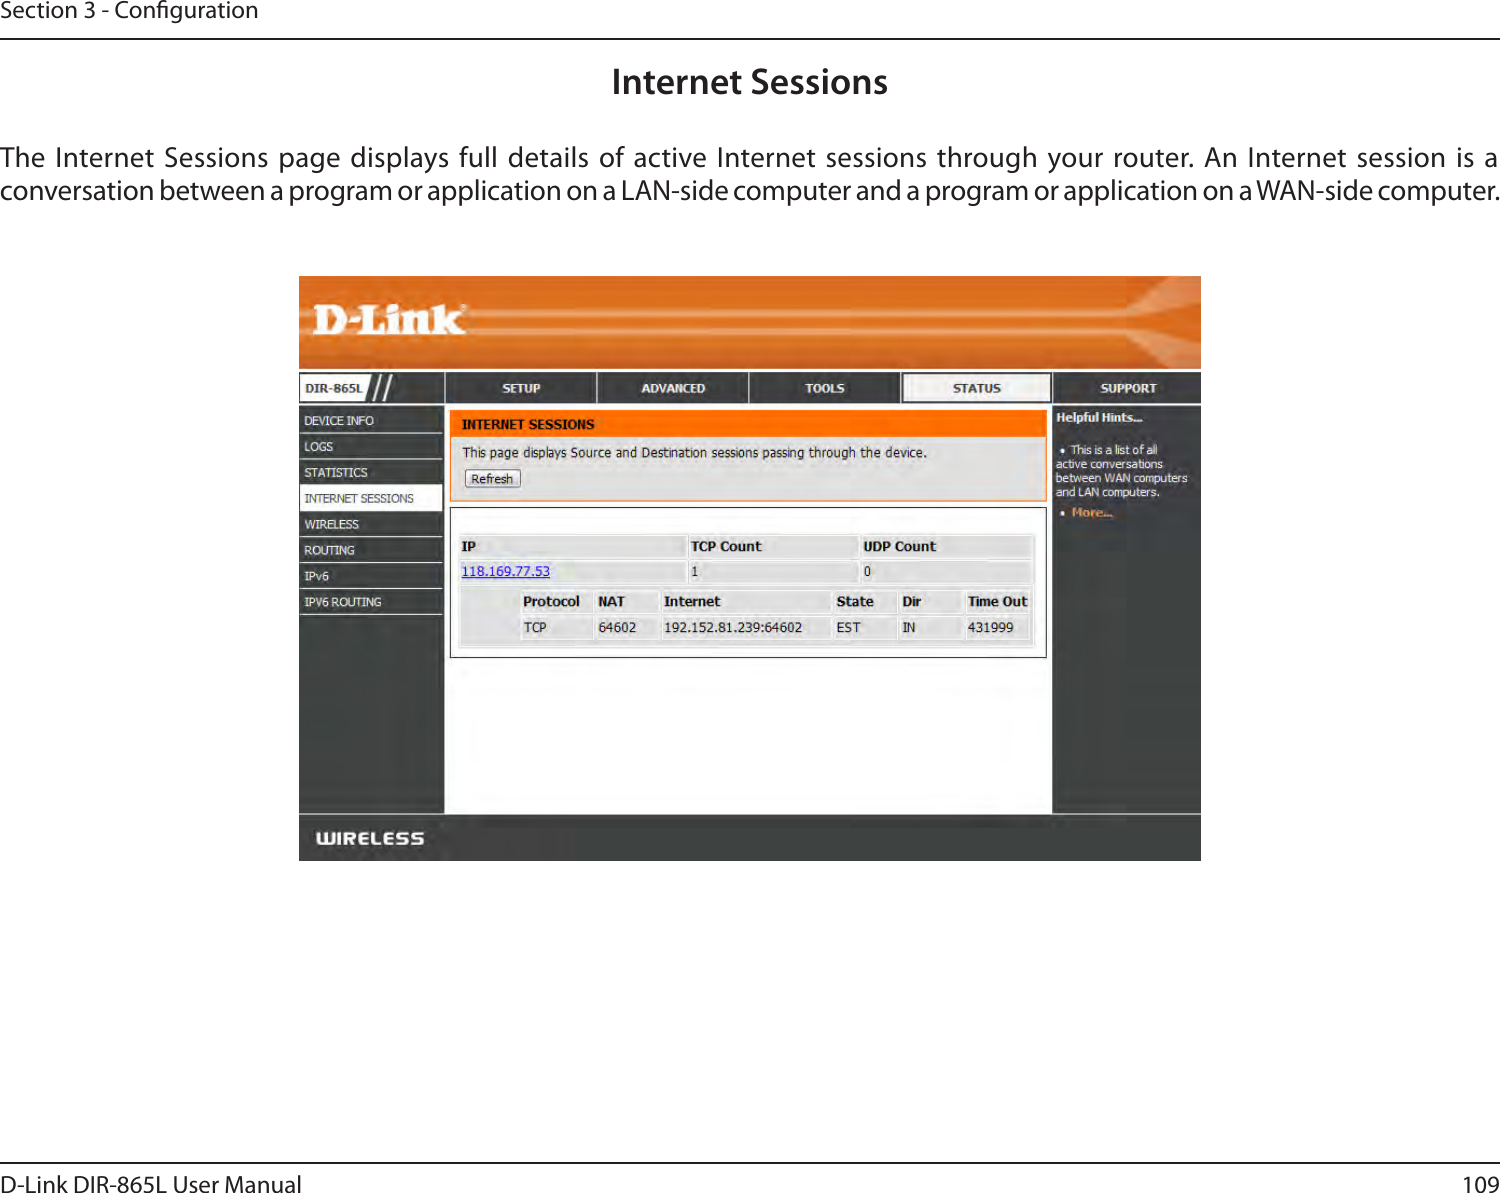 109D-Link DIR-865L User ManualSection 3 - CongurationInternet SessionsThe Internet Sessions  page displays full details of active Internet sessions  through your router. An Internet session is a conversation between a program or application on a LAN-side computer and a program or application on a WAN-side computer. 